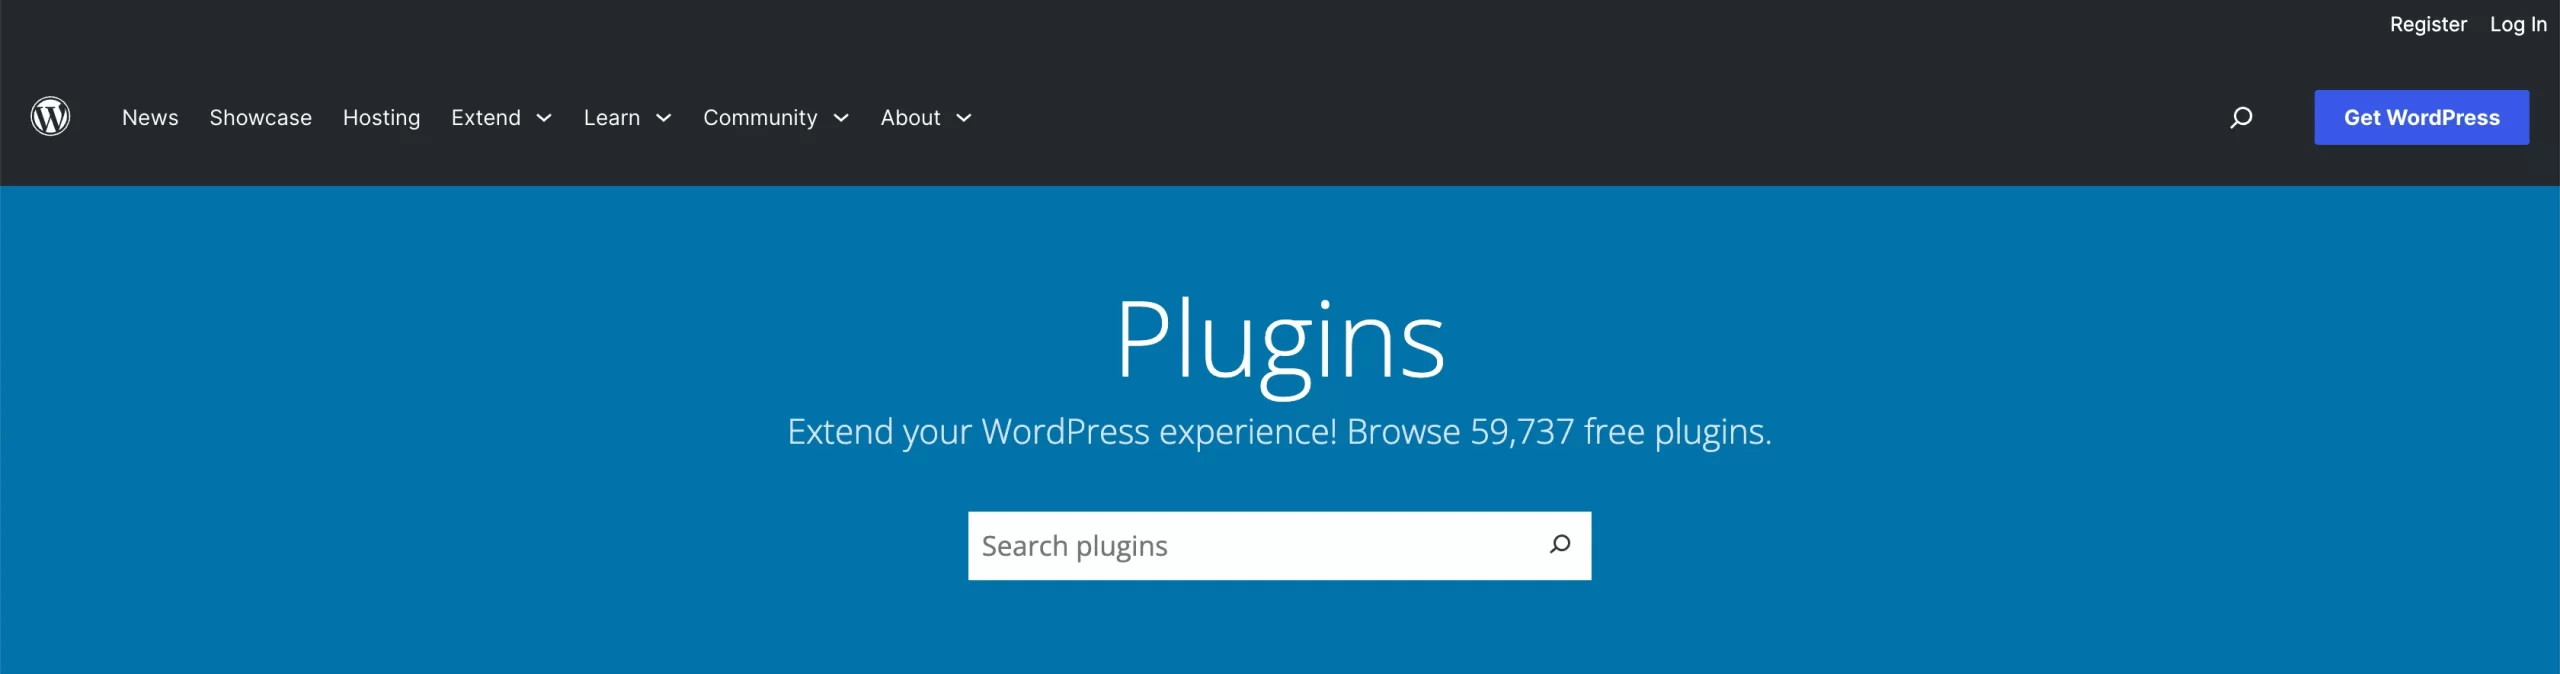 WooCommerce users can make use of thousands of available WordPress plugins